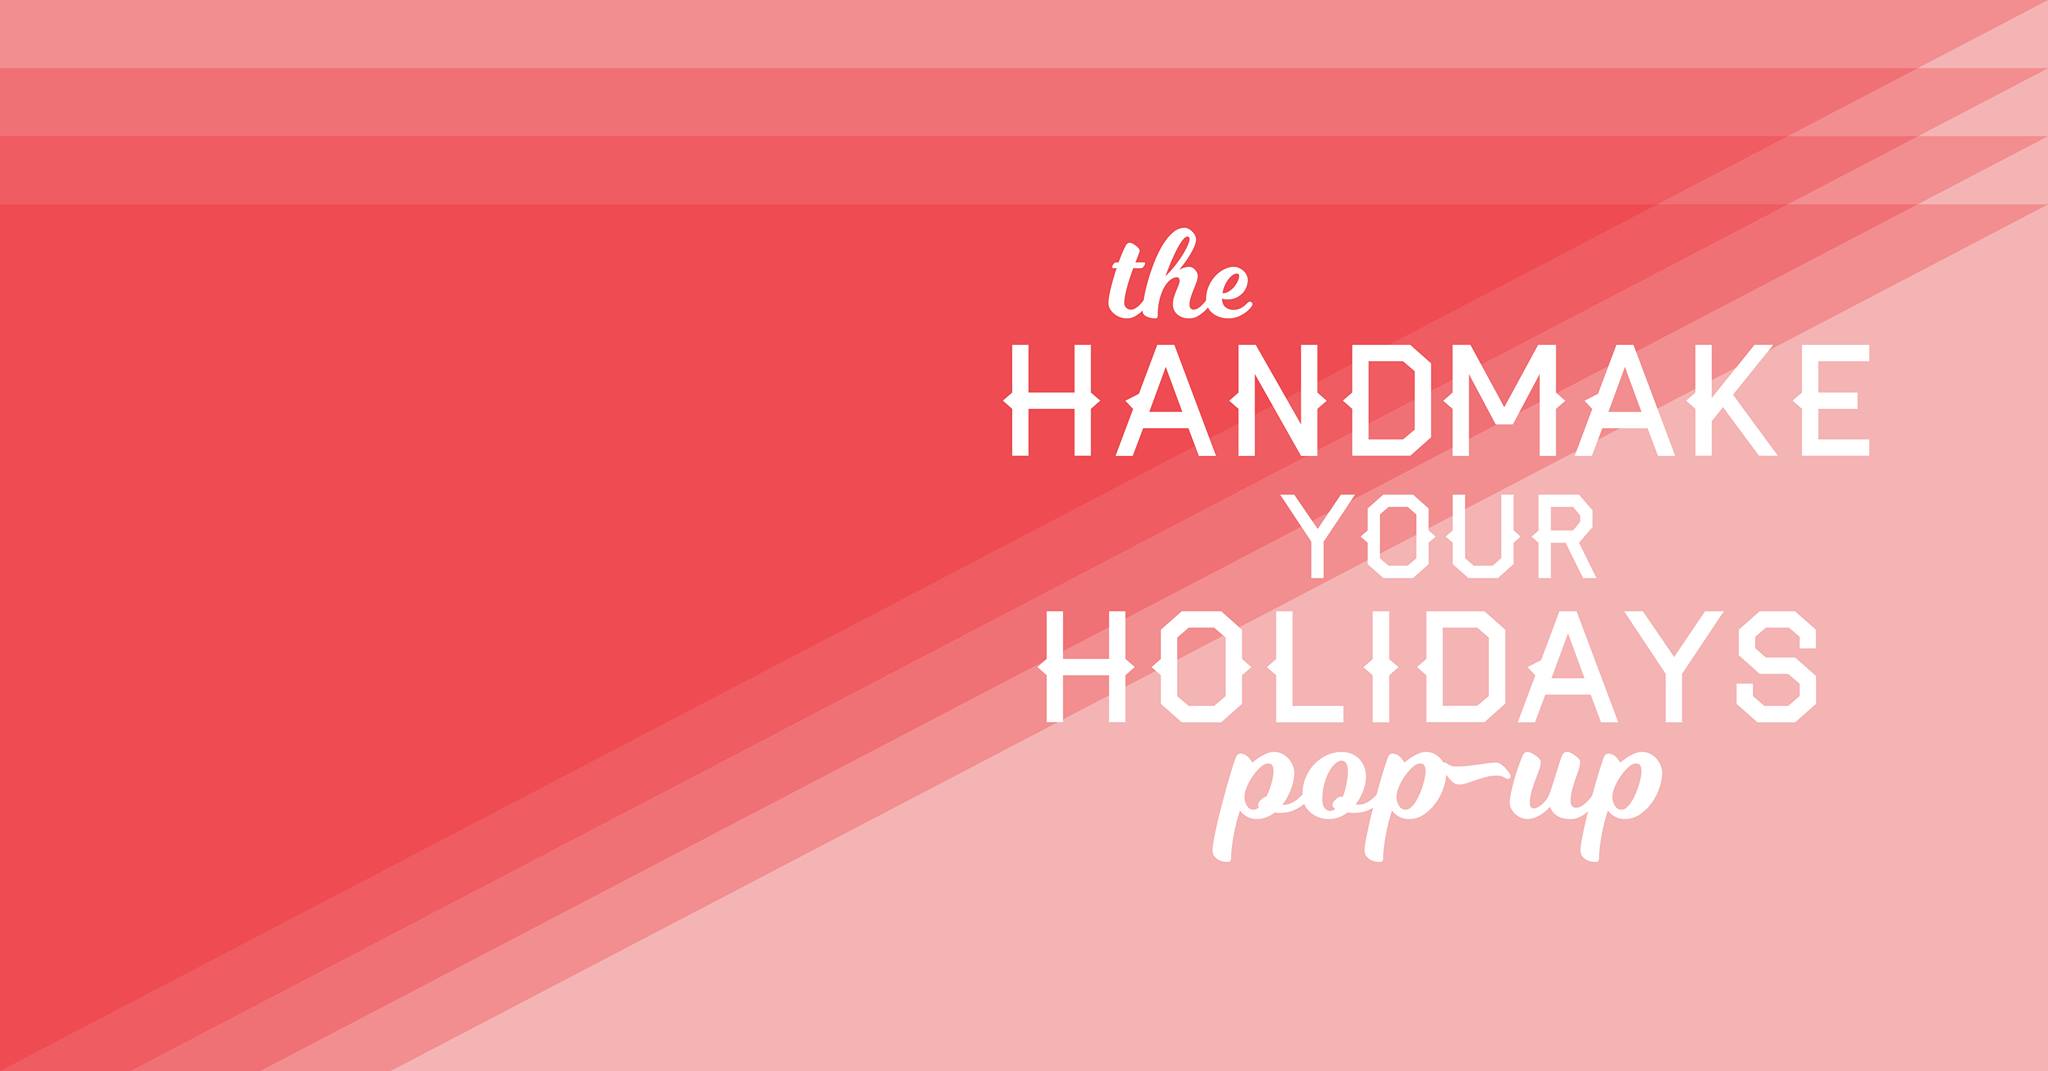 the Handmake Your Holidays Pop-Up